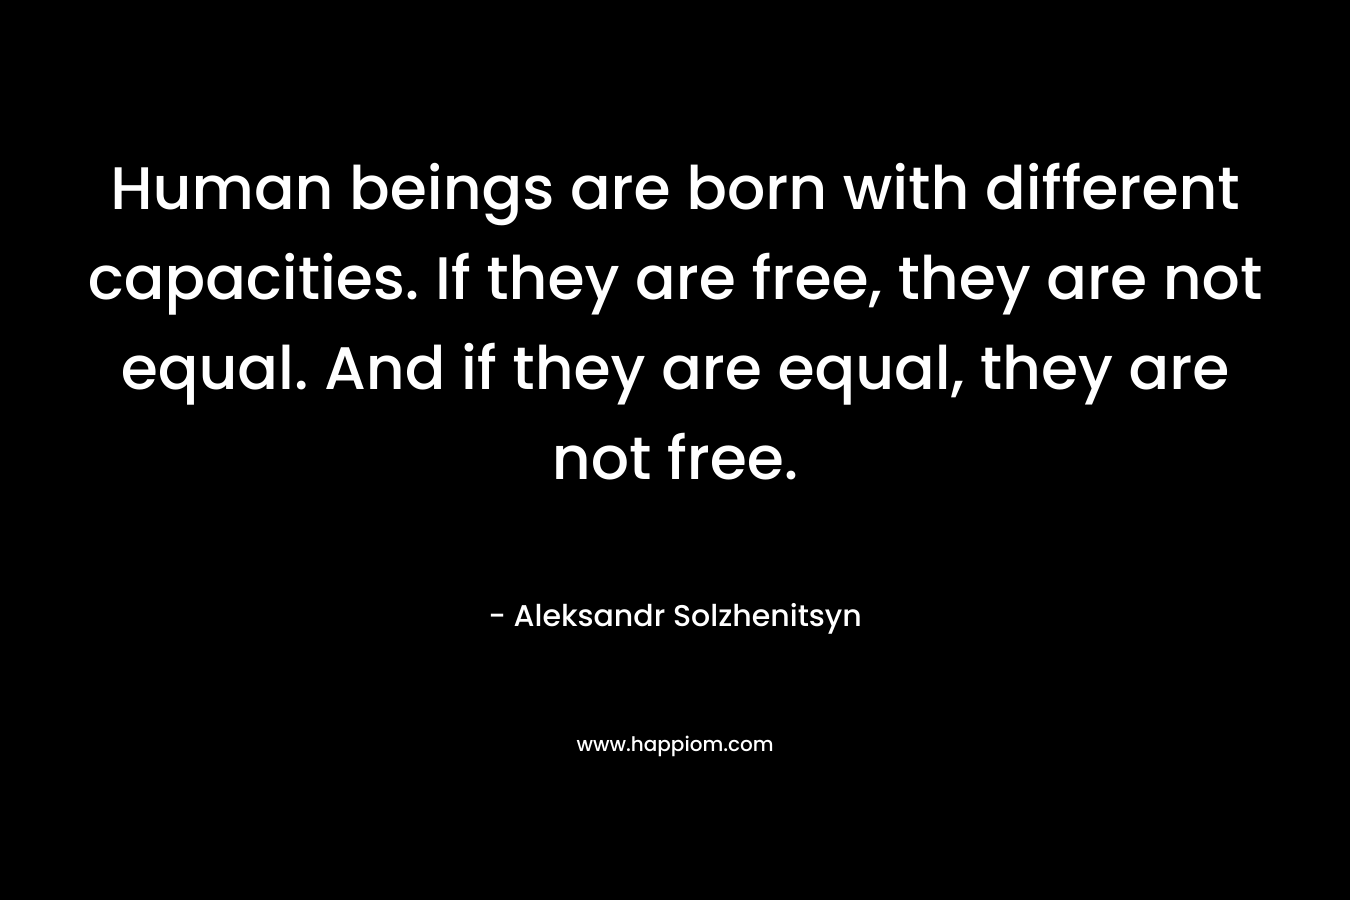 Human beings are born with different capacities. If they are free, they are not equal. And if they are equal, they are not free. – Aleksandr Solzhenitsyn